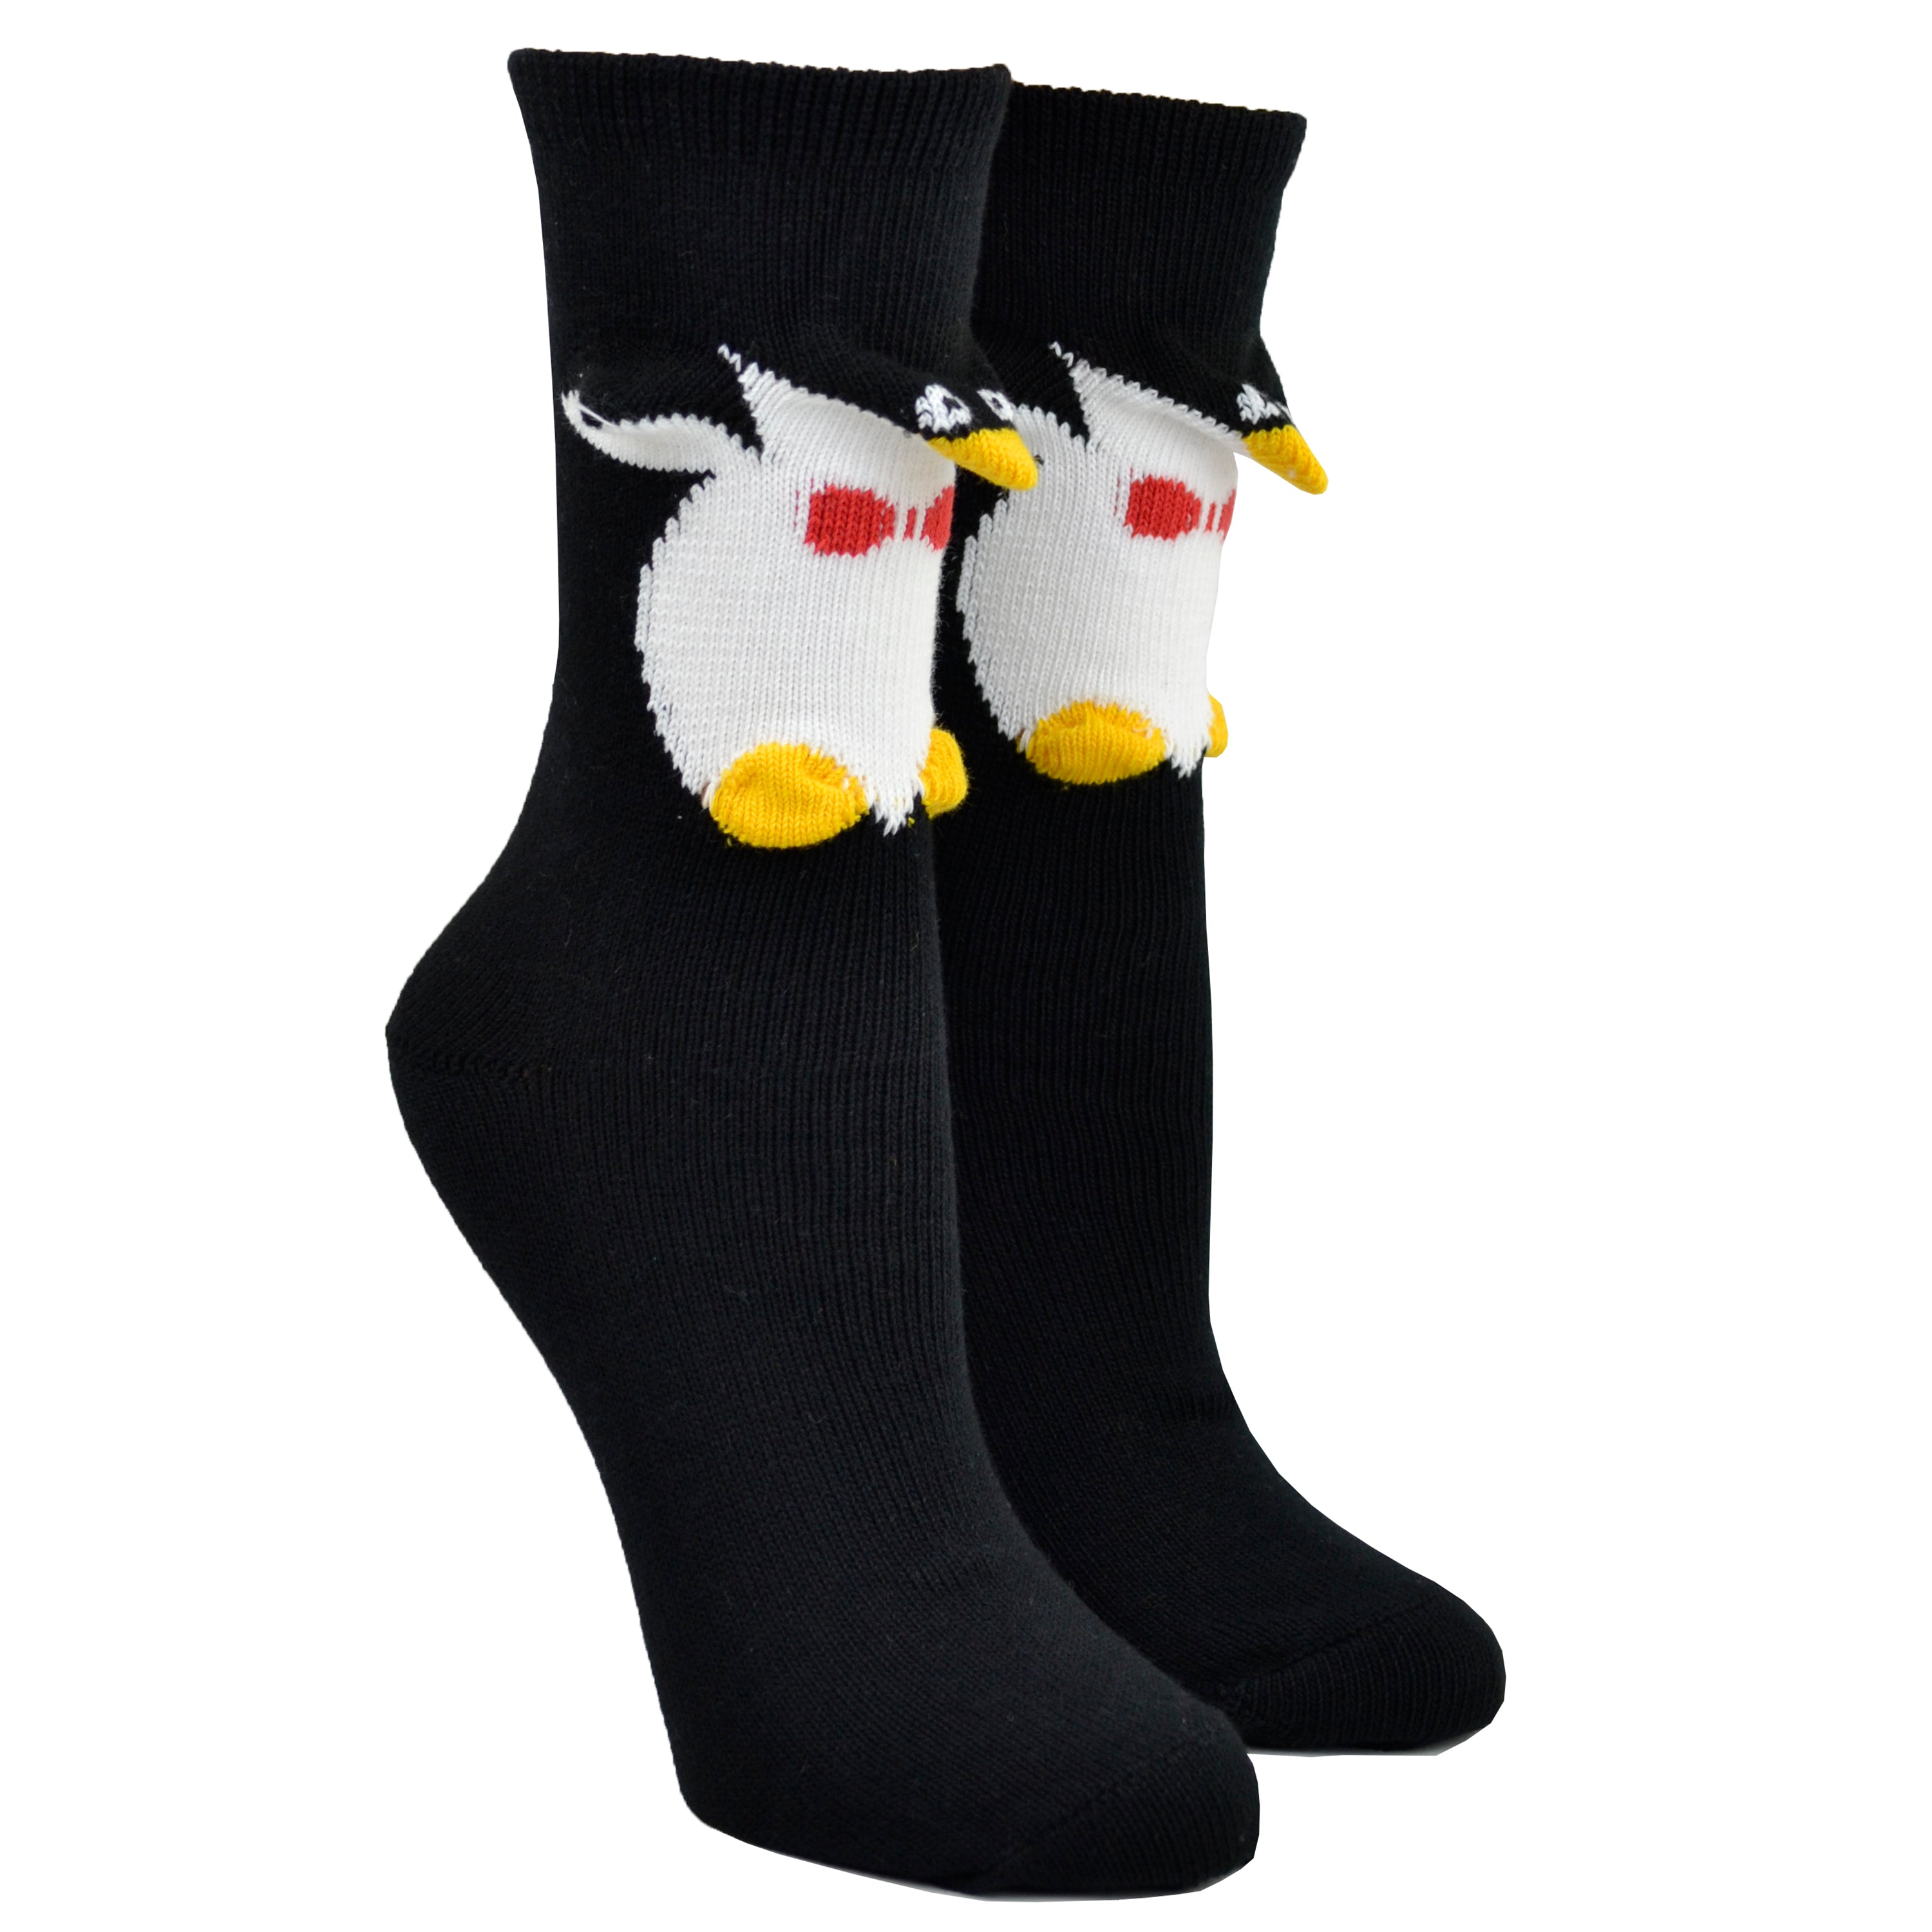 Shown on a foot mold, a pair of Foot Traffic, black and white cotton women's crew socks with three dimensional pattern of cute penguin